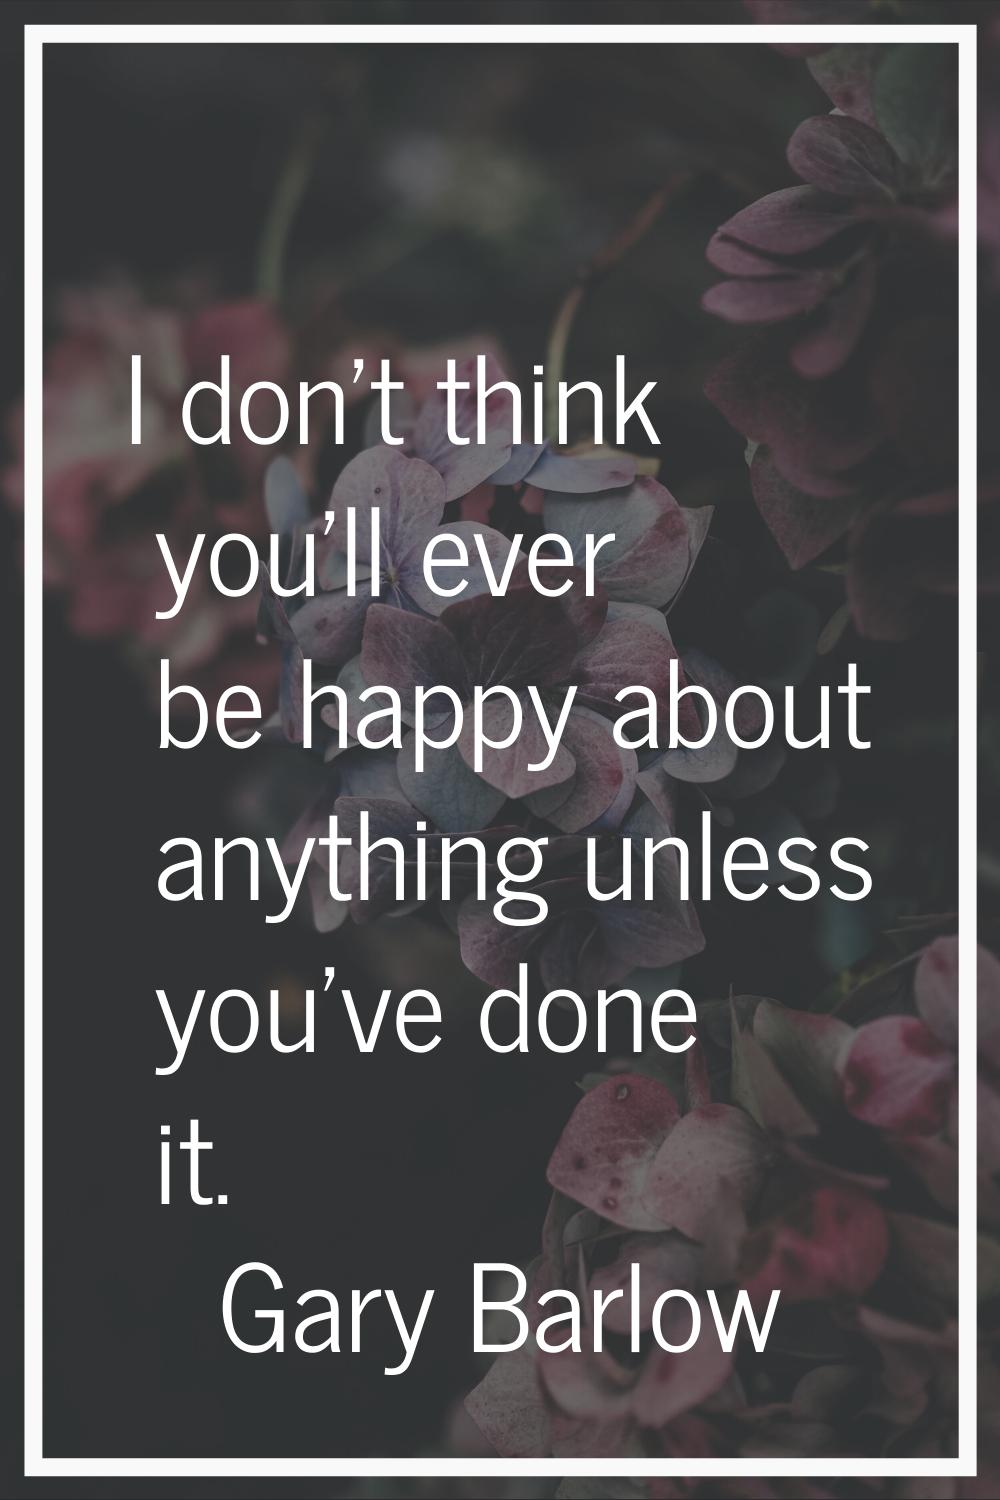 I don't think you'll ever be happy about anything unless you've done it.